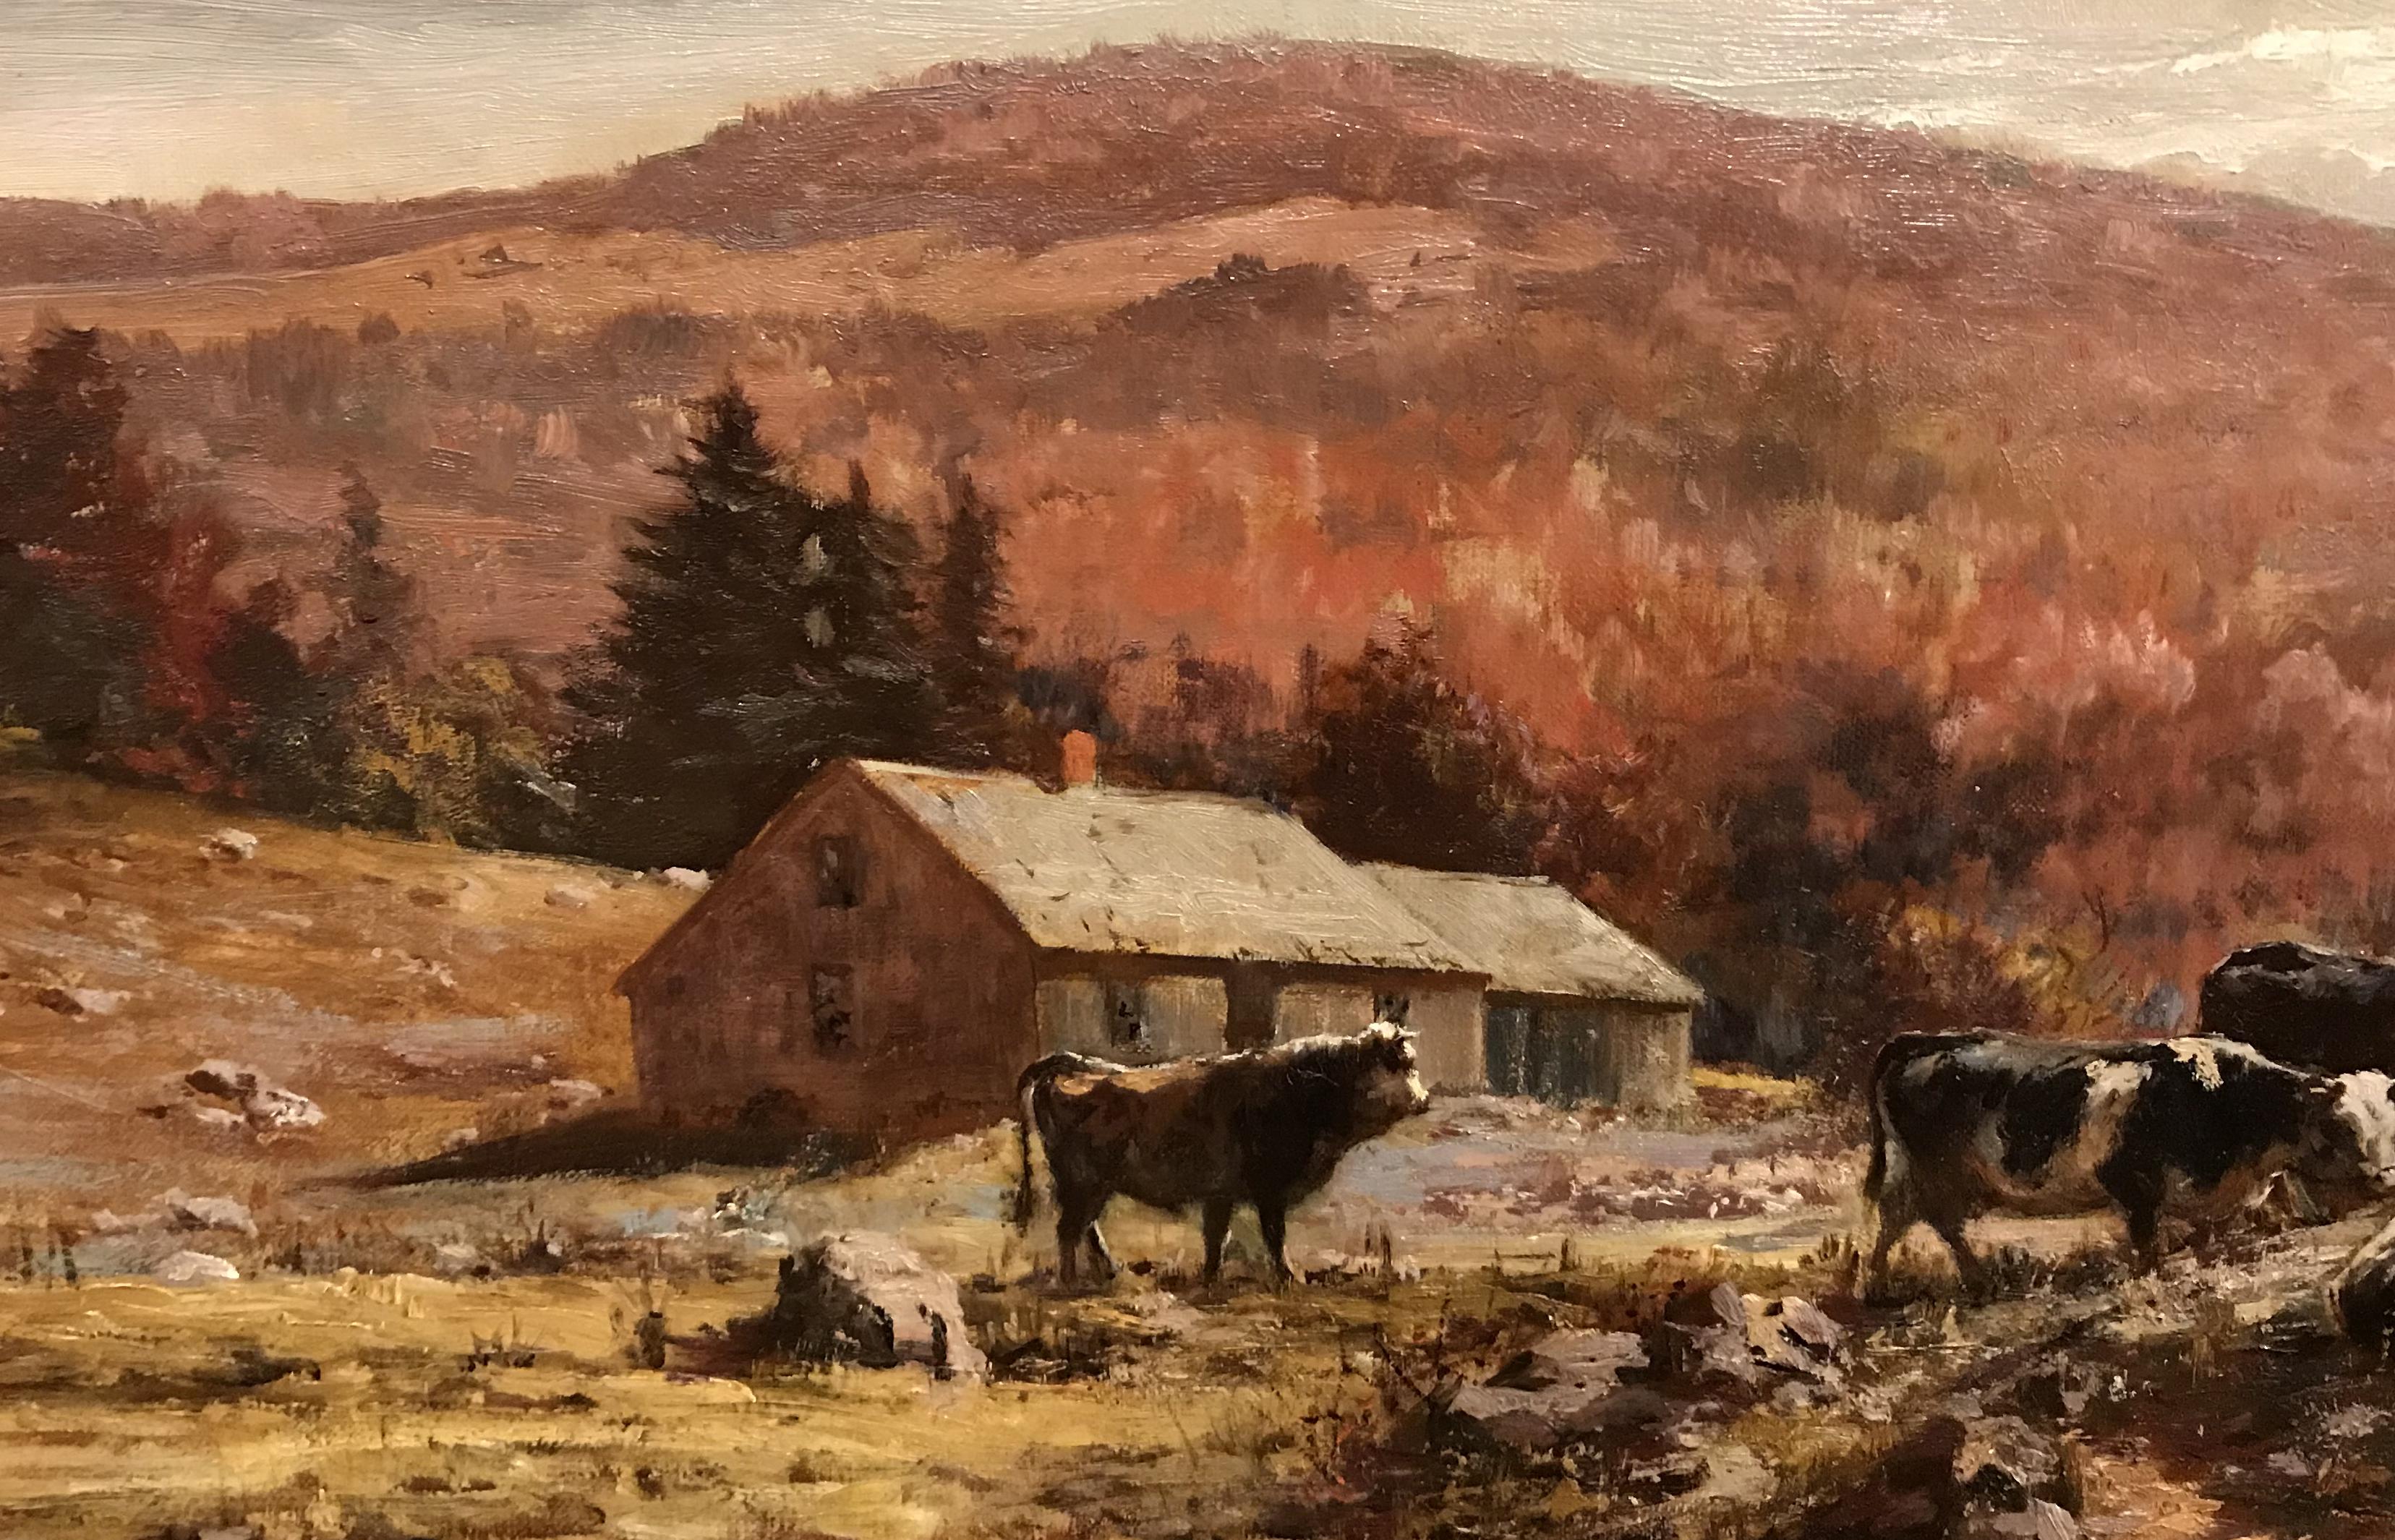 New Hampshire Landscape with Cattle Grazing - American Impressionist Painting by William Preston Phelps